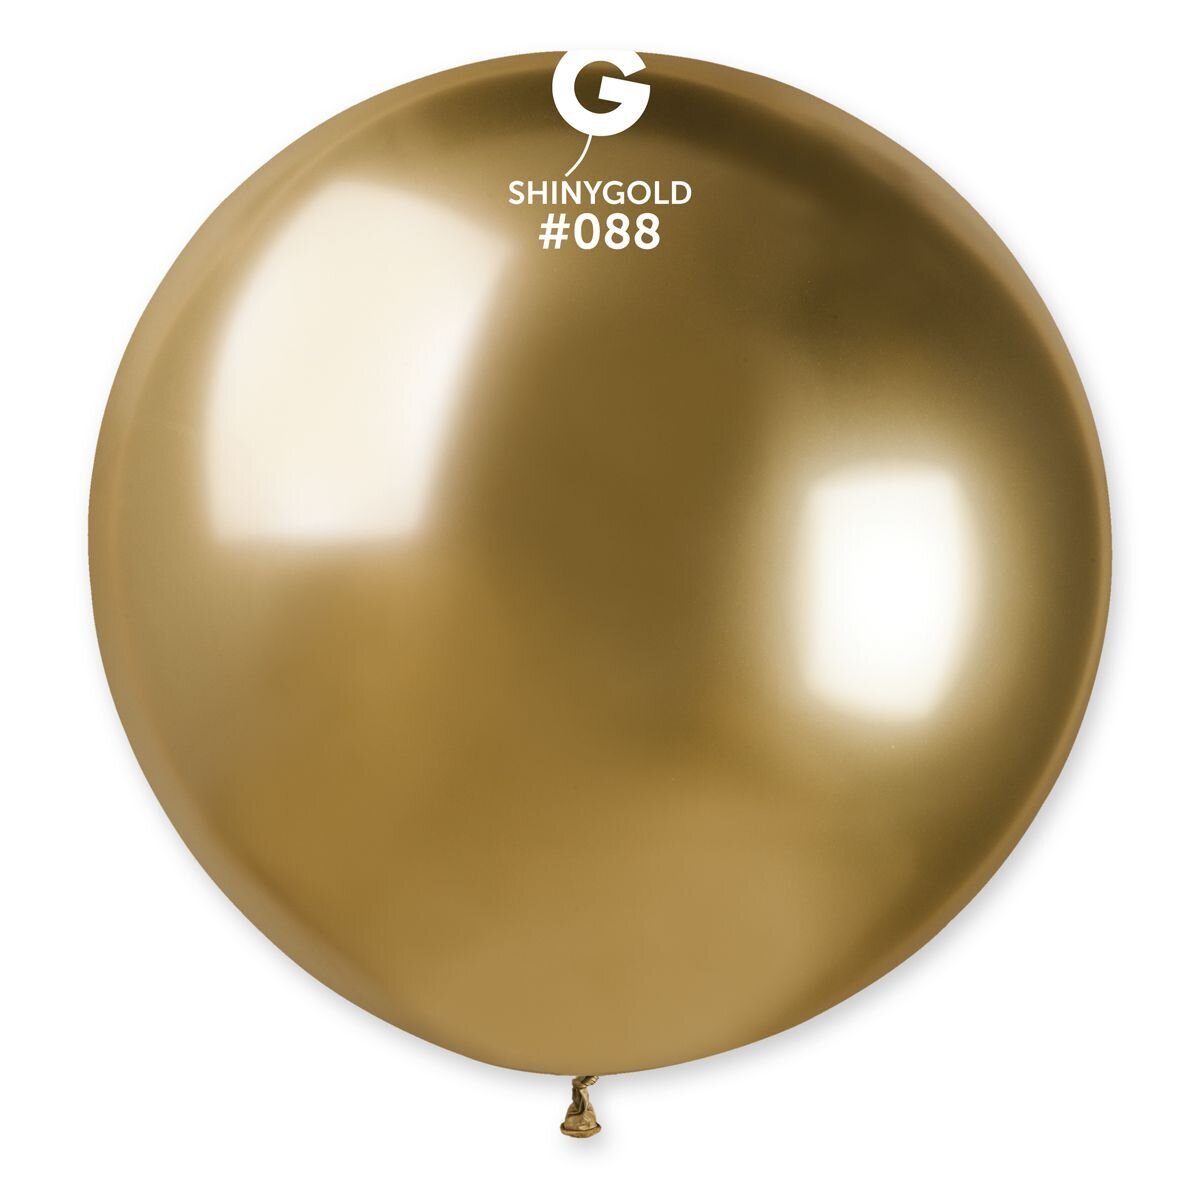 Gemar Latex Balloons Shiny Gold #088 31in - 1 piece